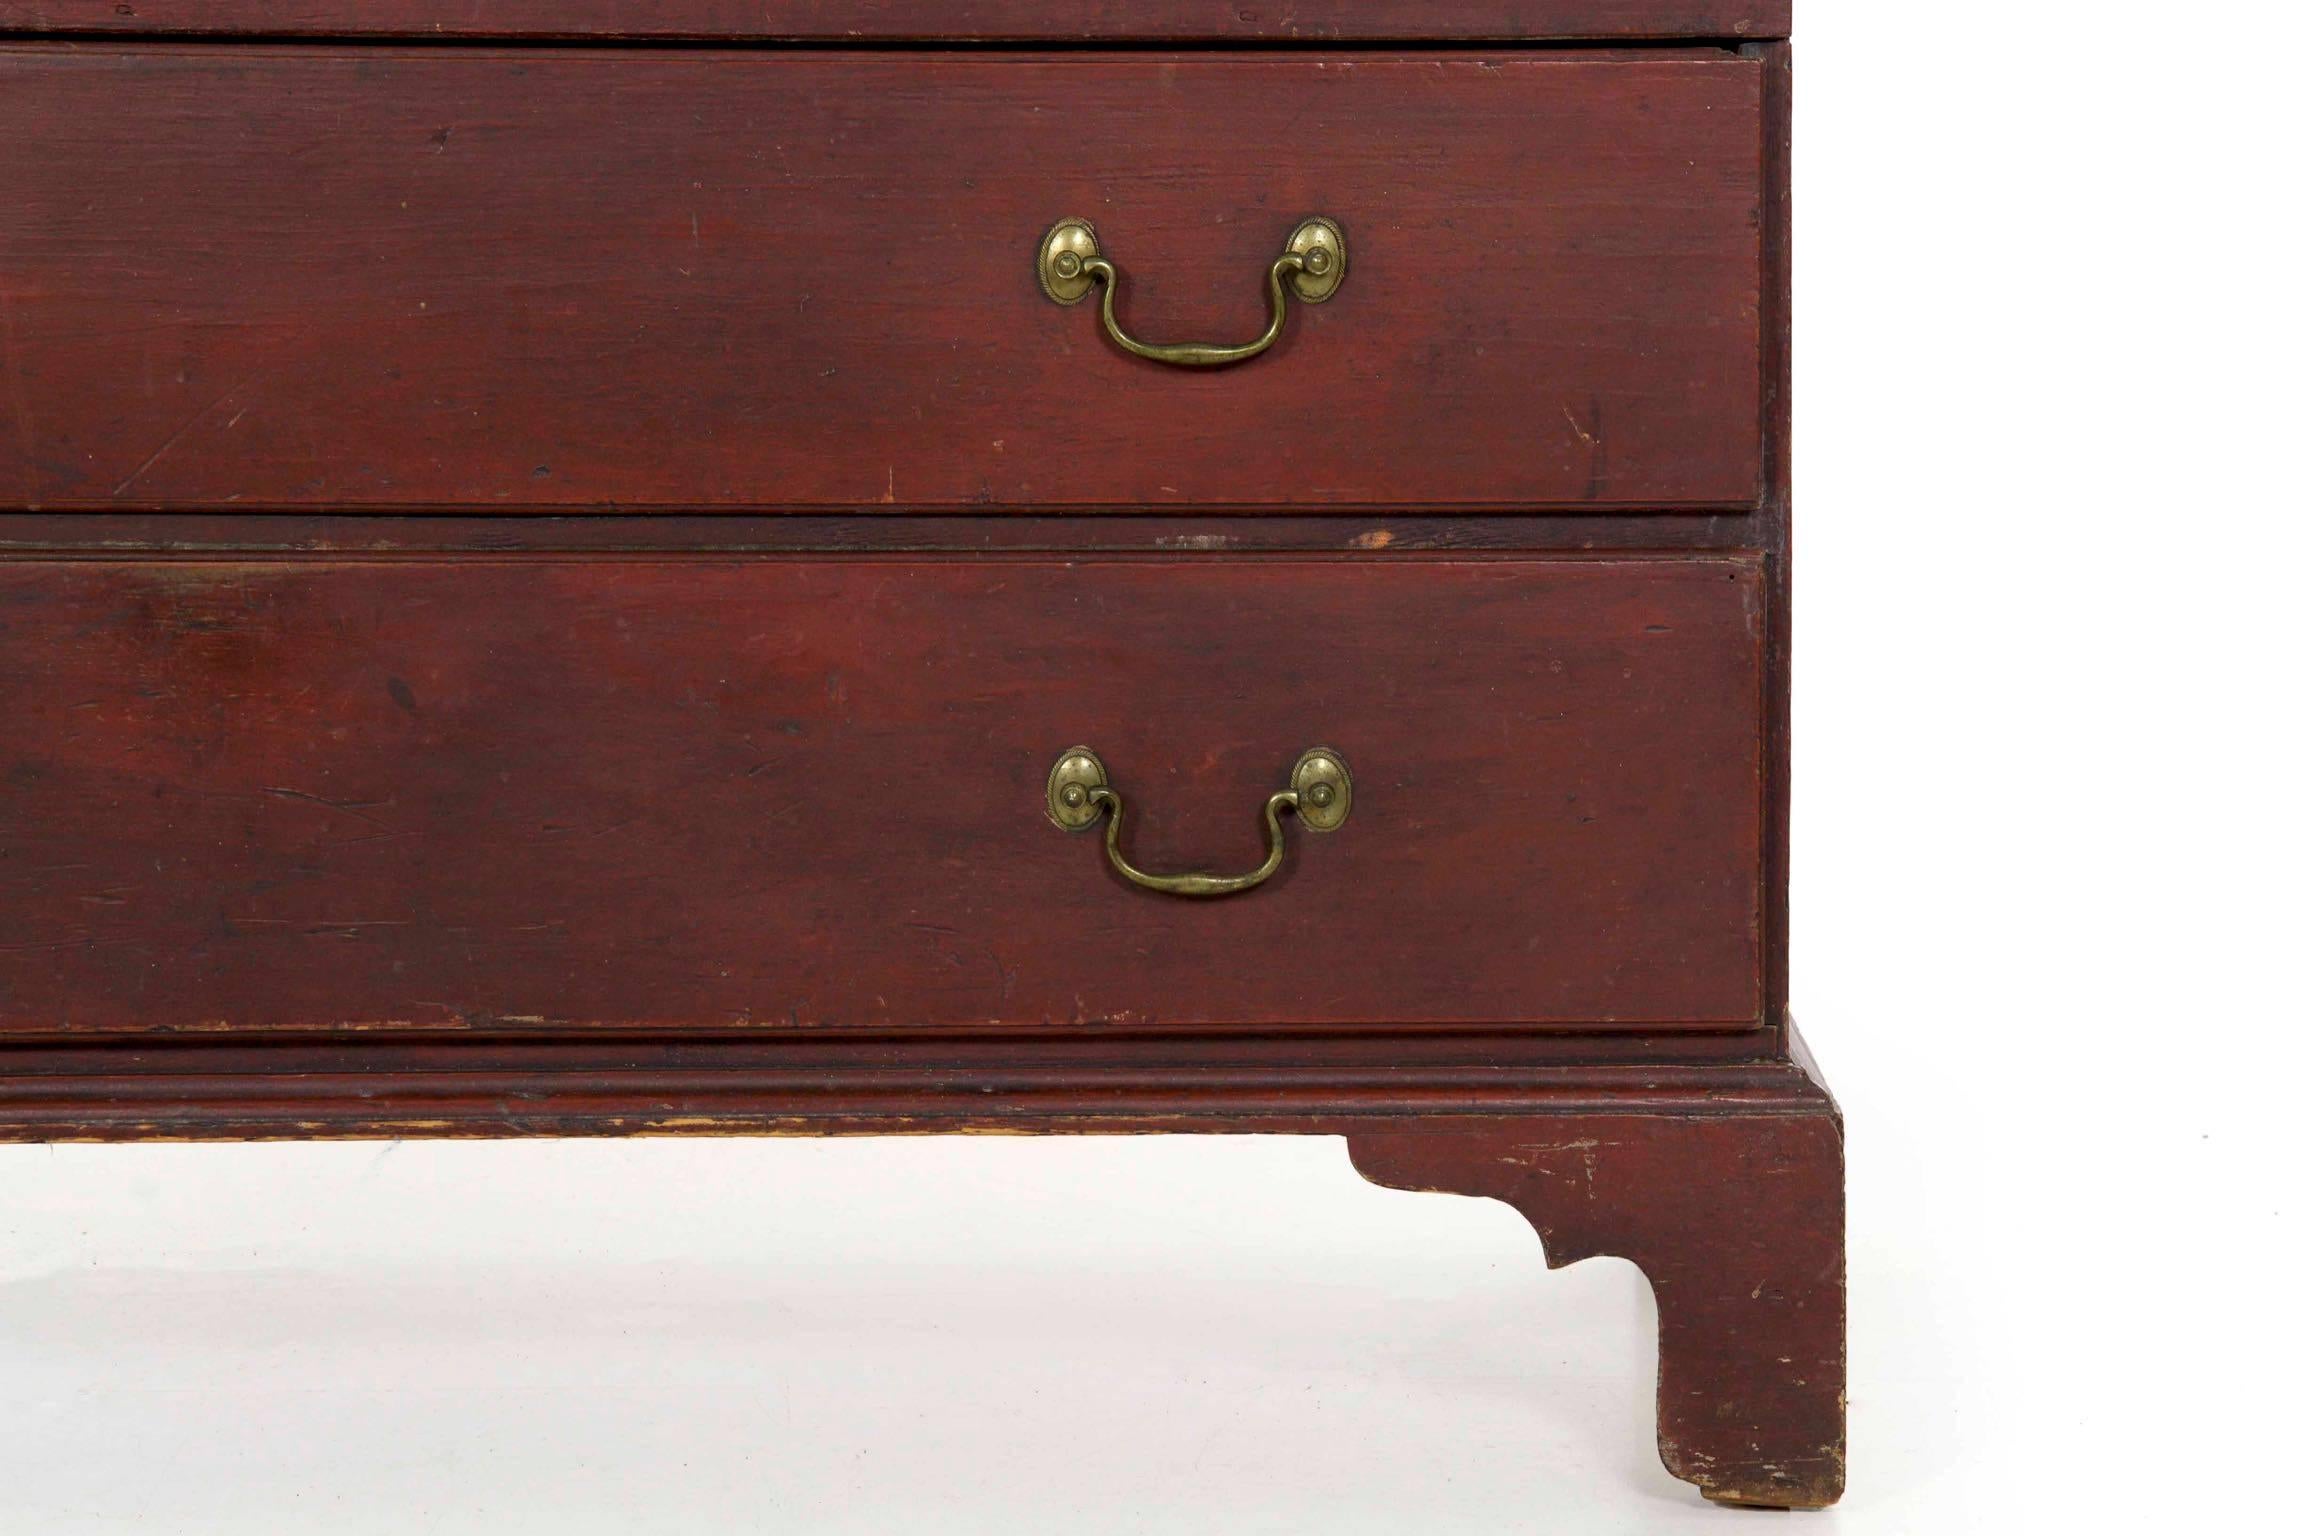 19th Century American Red Painted Mule Blanket Chest of Drawers 1